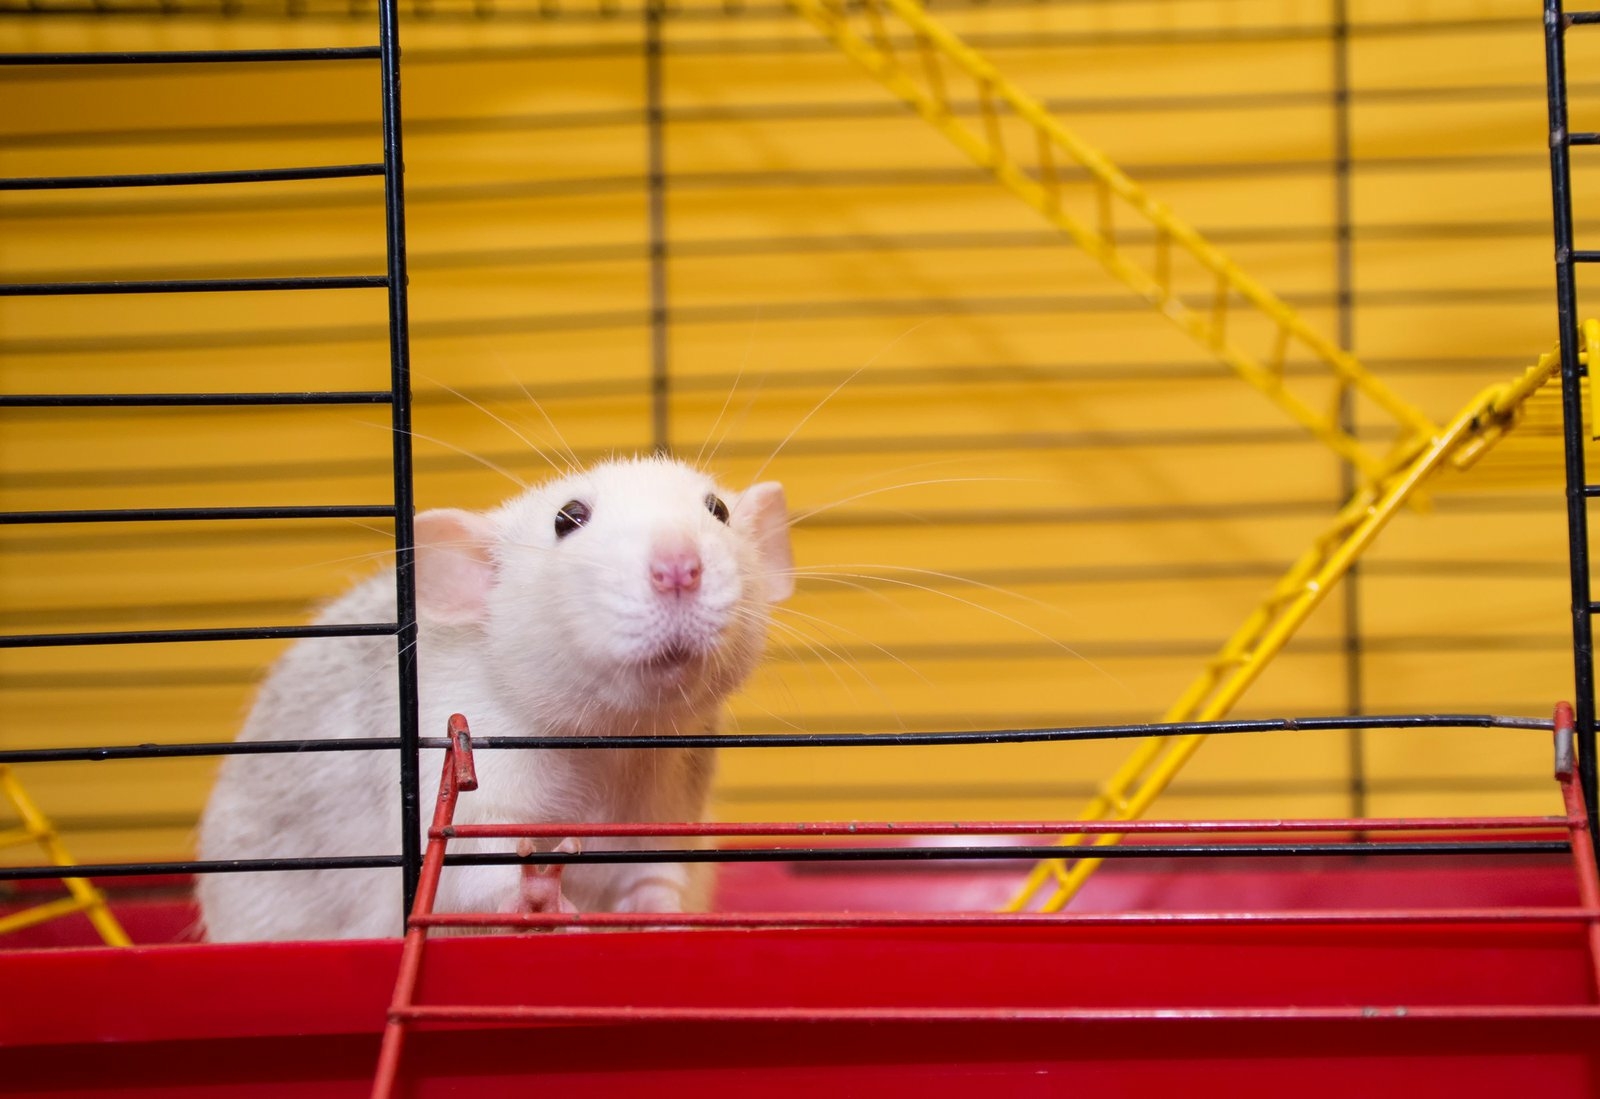 How science approaches the world without animal testing